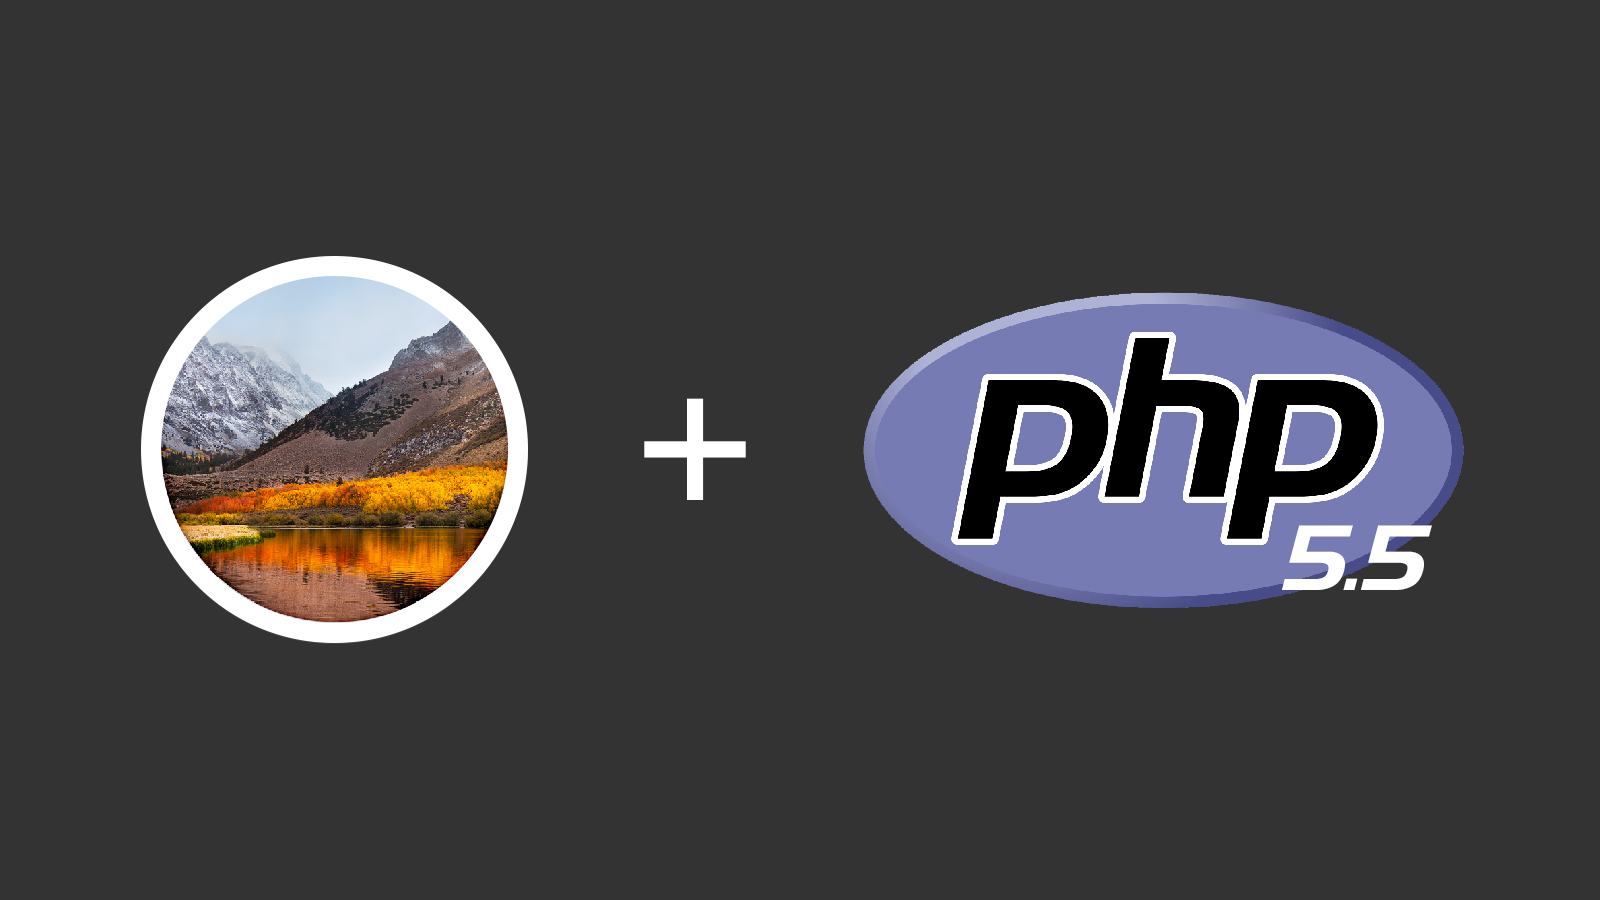 Setting up High Sierra for Local Web Development with PHP 5.5 Support